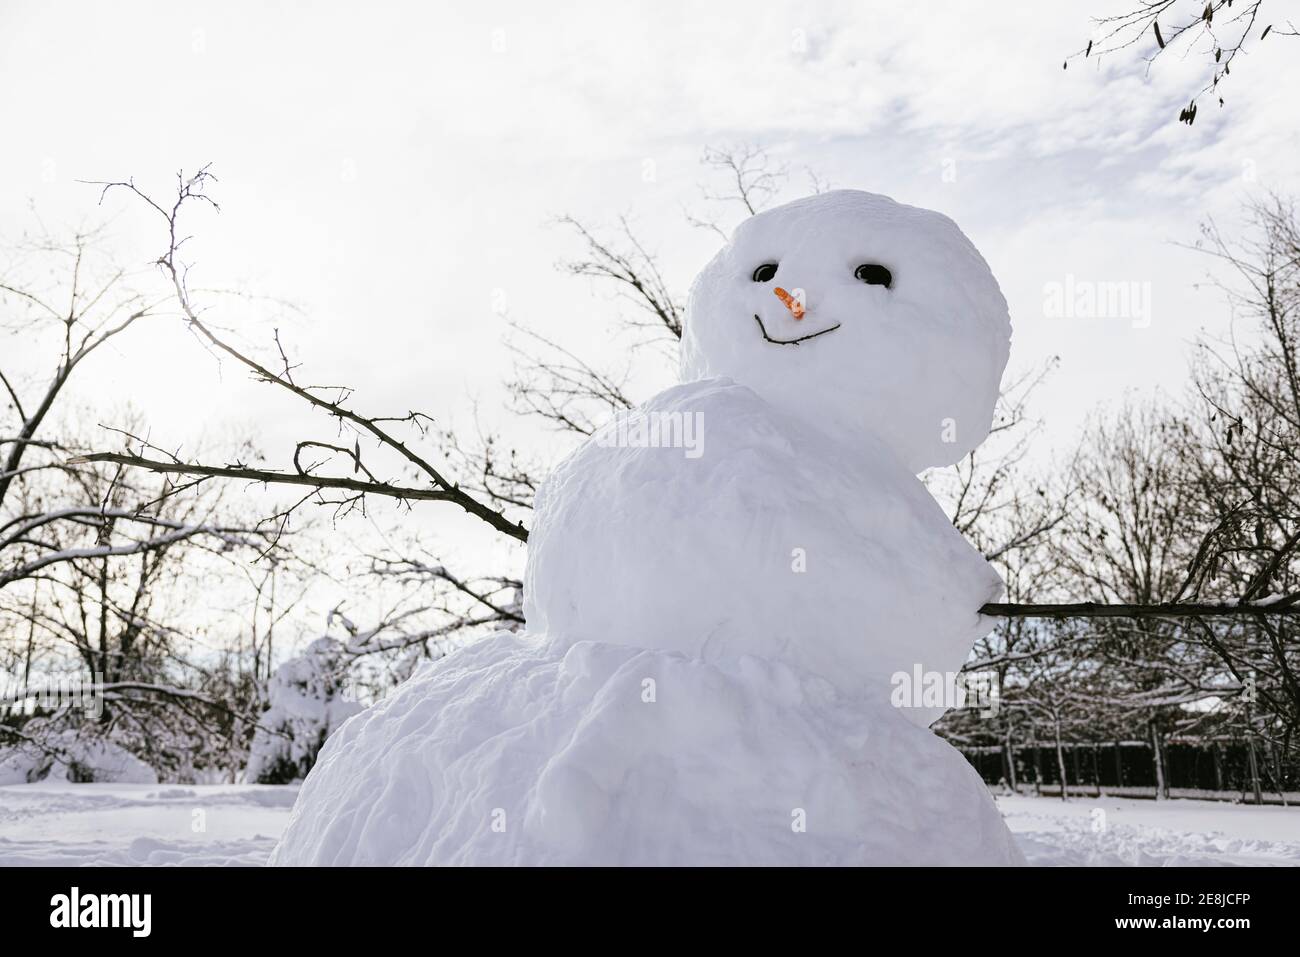 Snowman on white land against dry trees under cloudy sky in town in cold weather Stock Photo